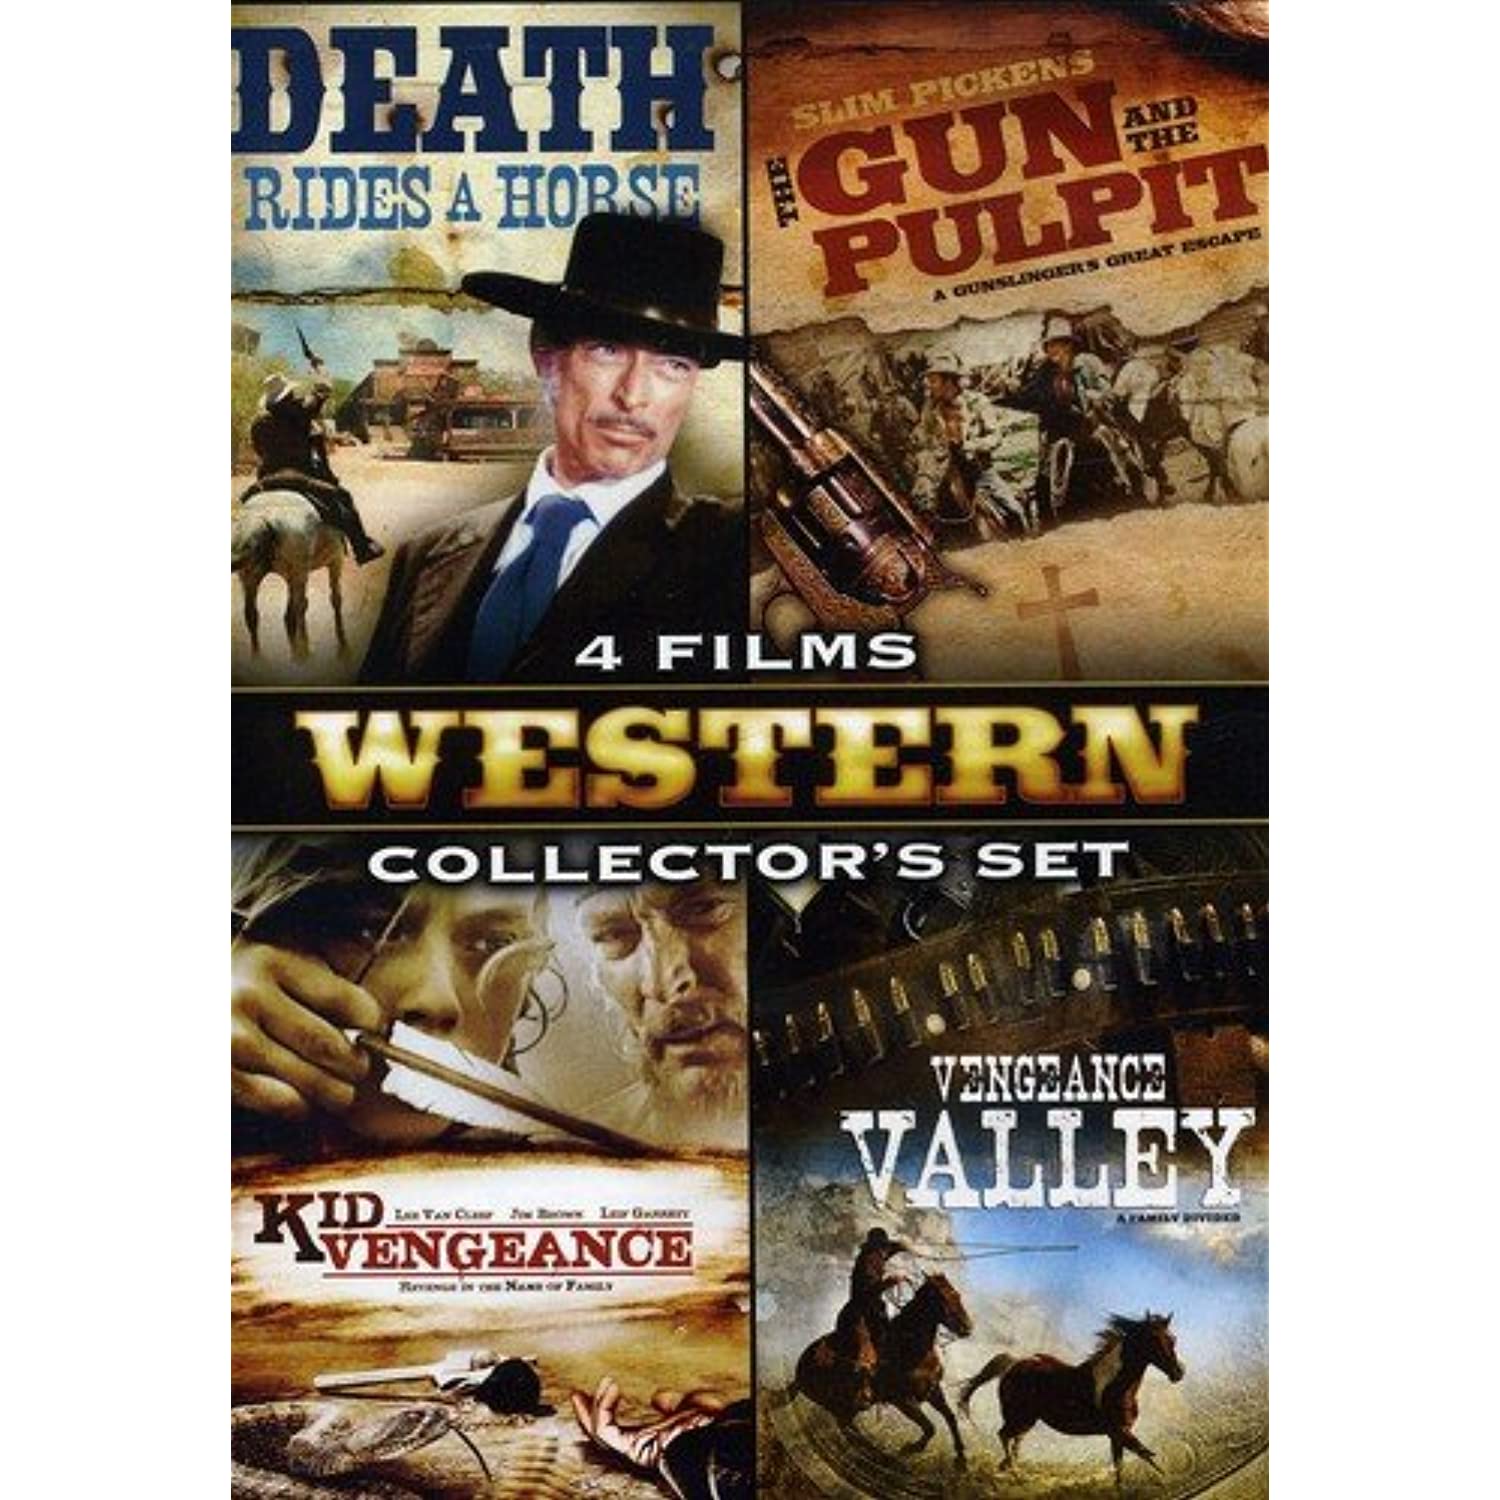 Classic Westerns Collector's Set 4 Films DVD